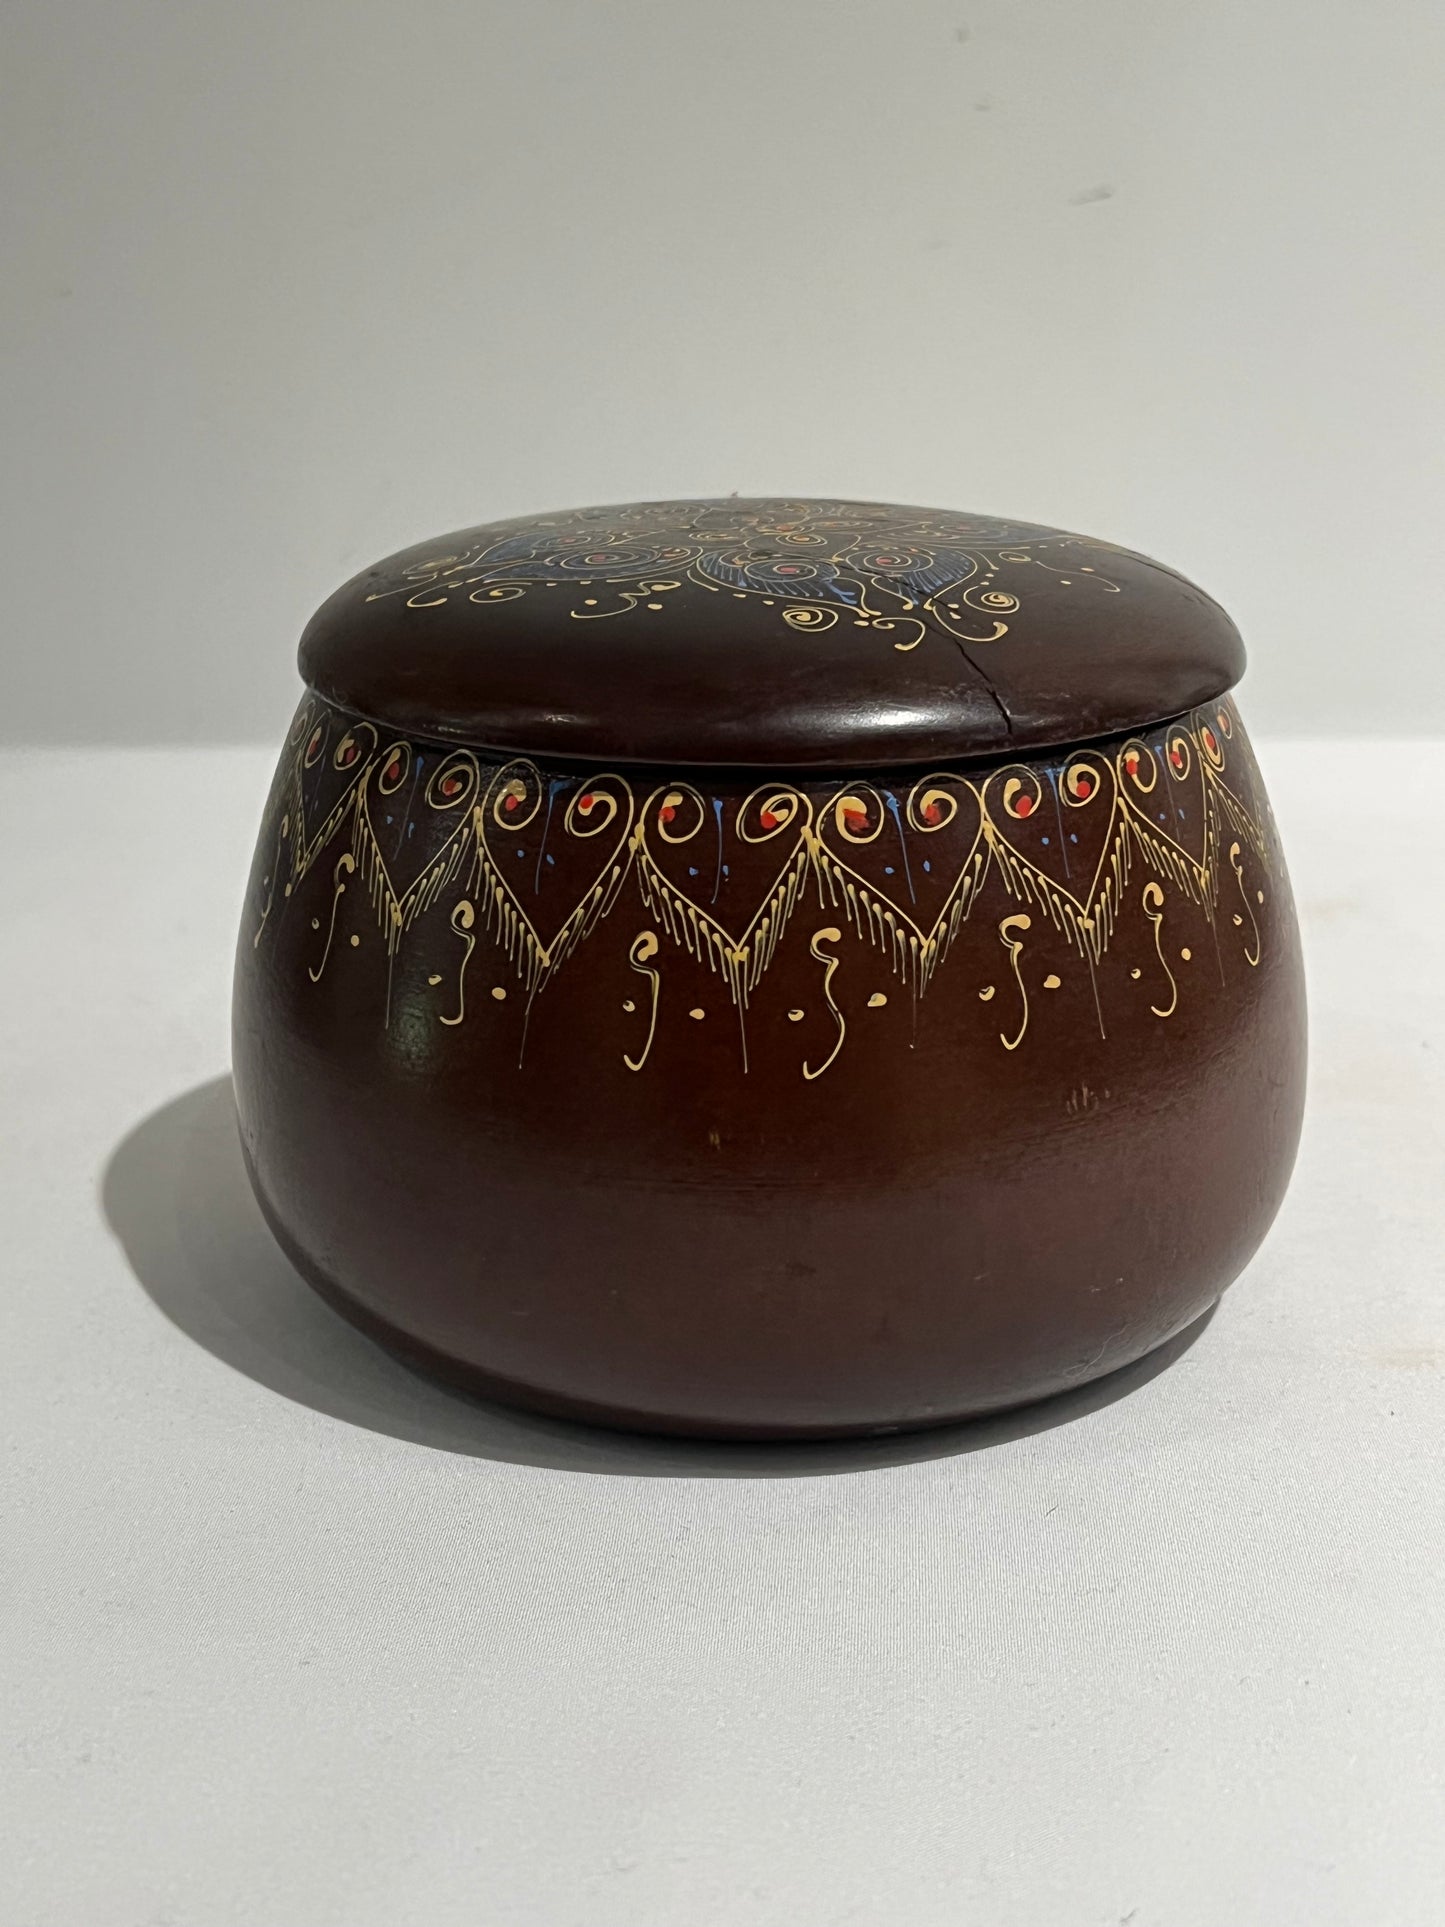 Decorative wood bowl with lid